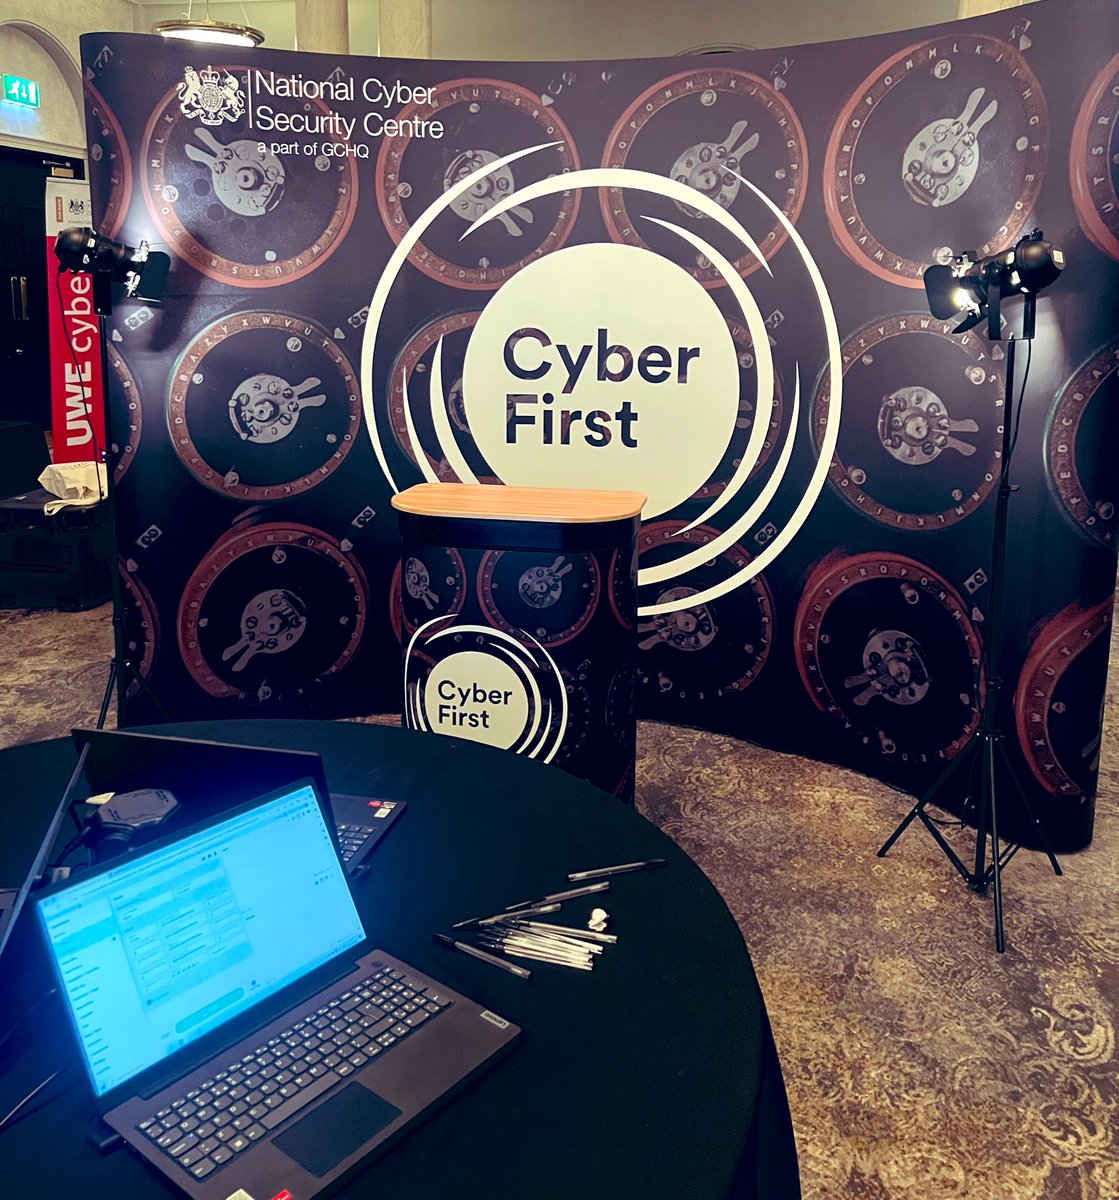 Thank you @NCSC for two amazing days at annual national conference, another fantastic event and opportunity to meet with the cyber community. Special thanks to our director of education for presenting on Cyber Security CPD highlighting the fantastic work of @WeAreComputing and